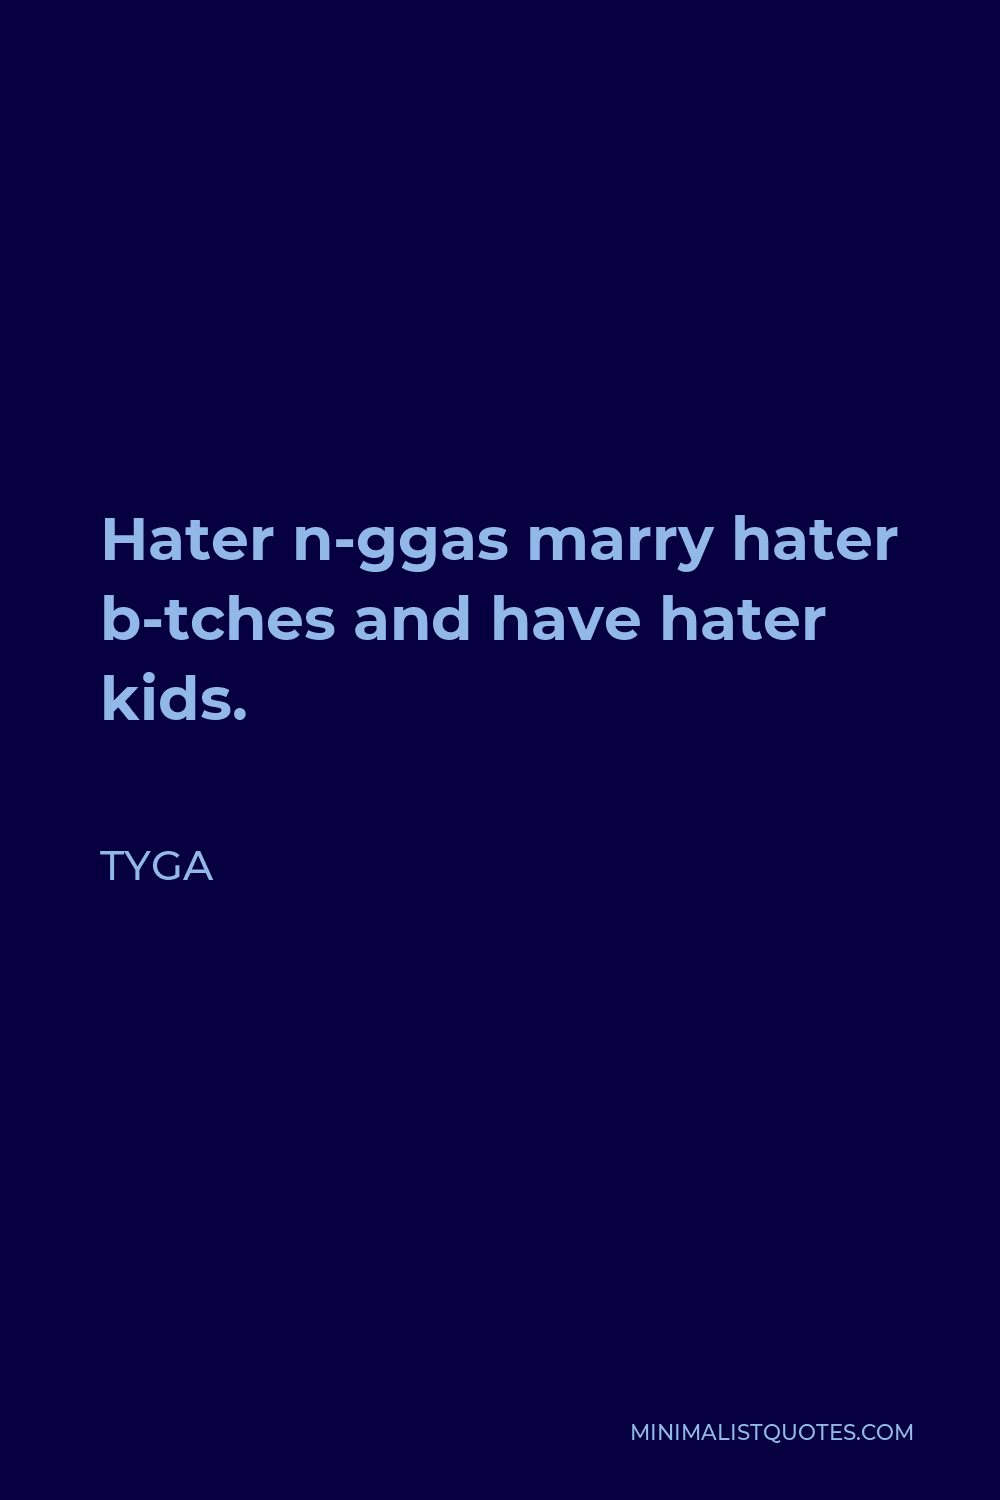 Tyga Quote - Hater n-ggas marry hater b-tches and have hater kids.